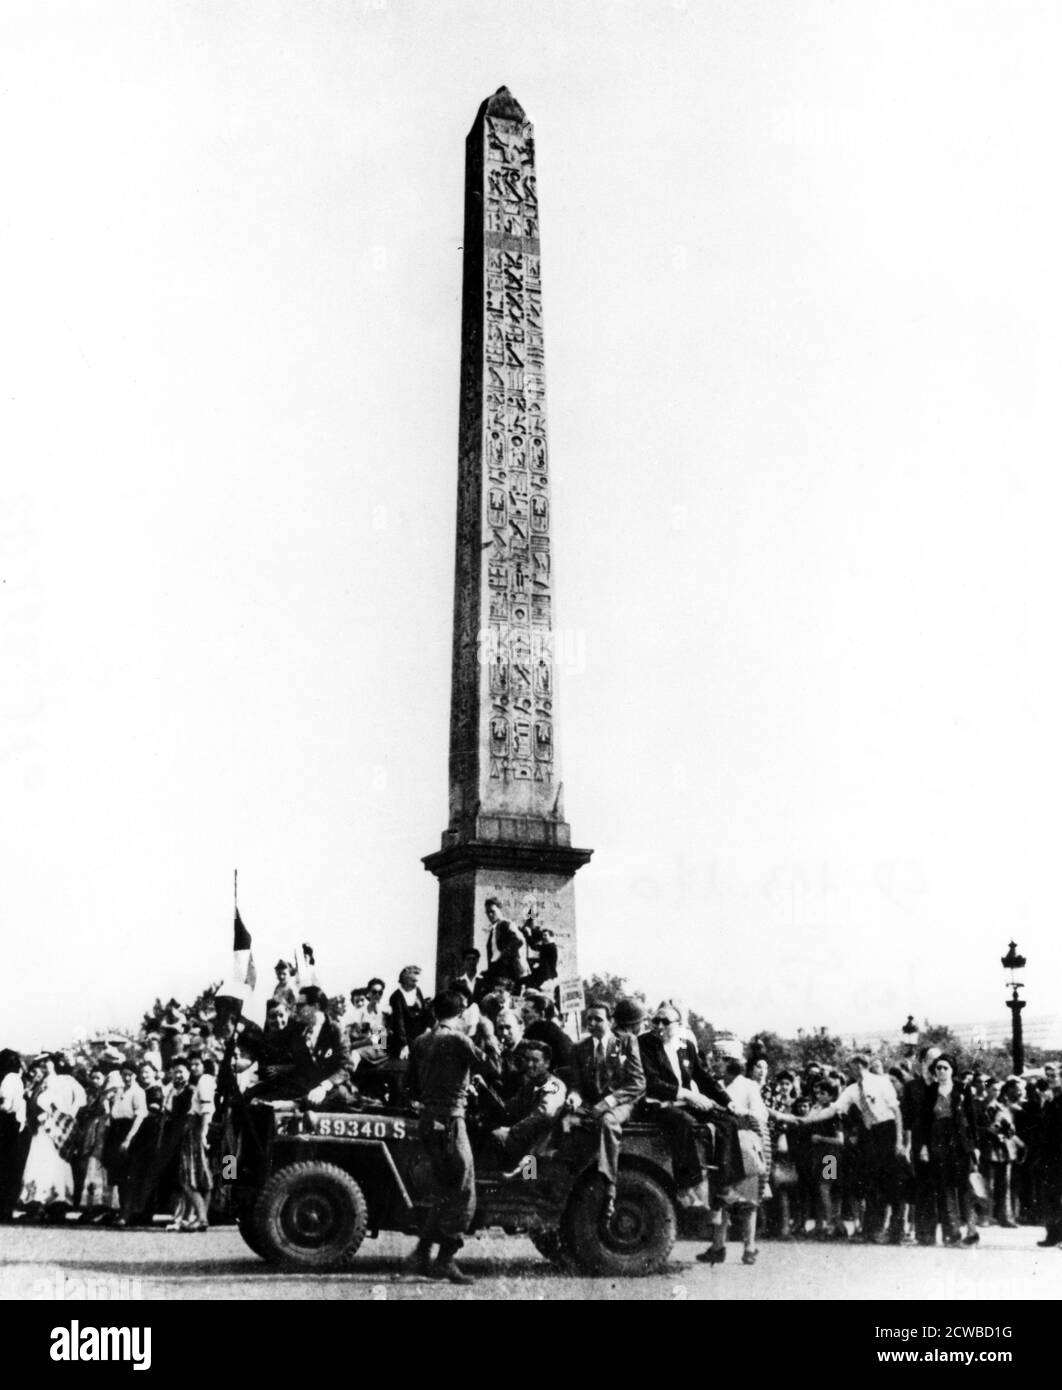 The liberation of Paris, August 1944. Jubilant French civilians surround the obelisk in the Place de la Concorde and others ride on an American jeep. The German forces in Paris surrendered to the Allies on 25 August 1944. The photographer is unknown. Stock Photo